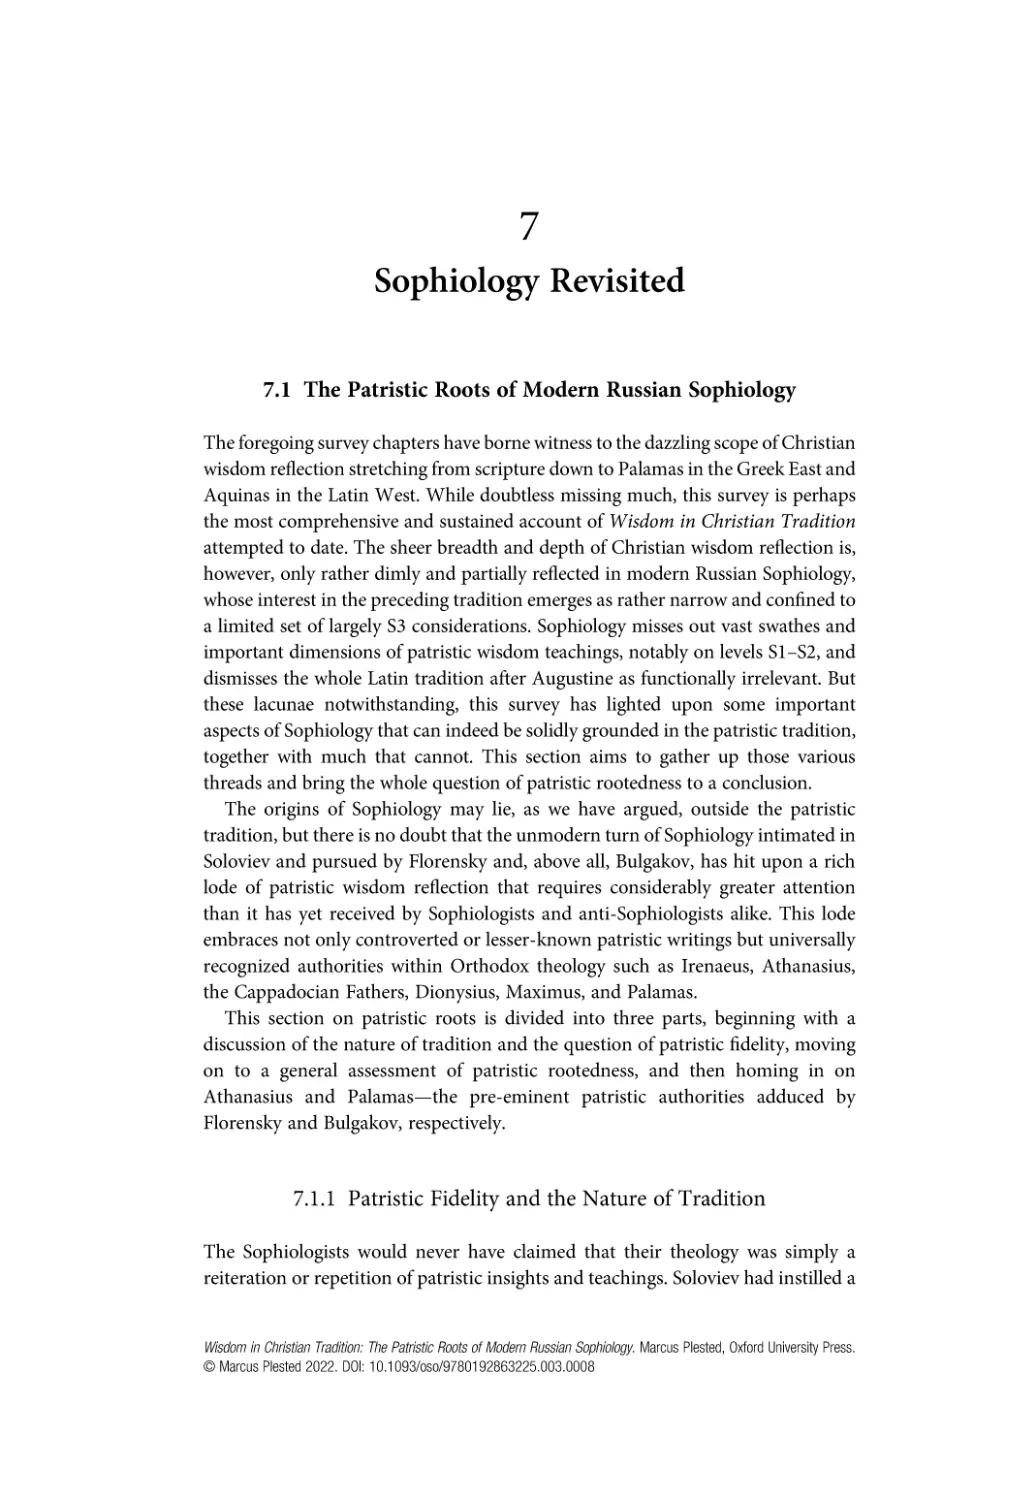 7
7.1 The Patristic Roots of Modern Russian Sophiology
7.1.1 Patristic Fidelity and the Nature of Tradition